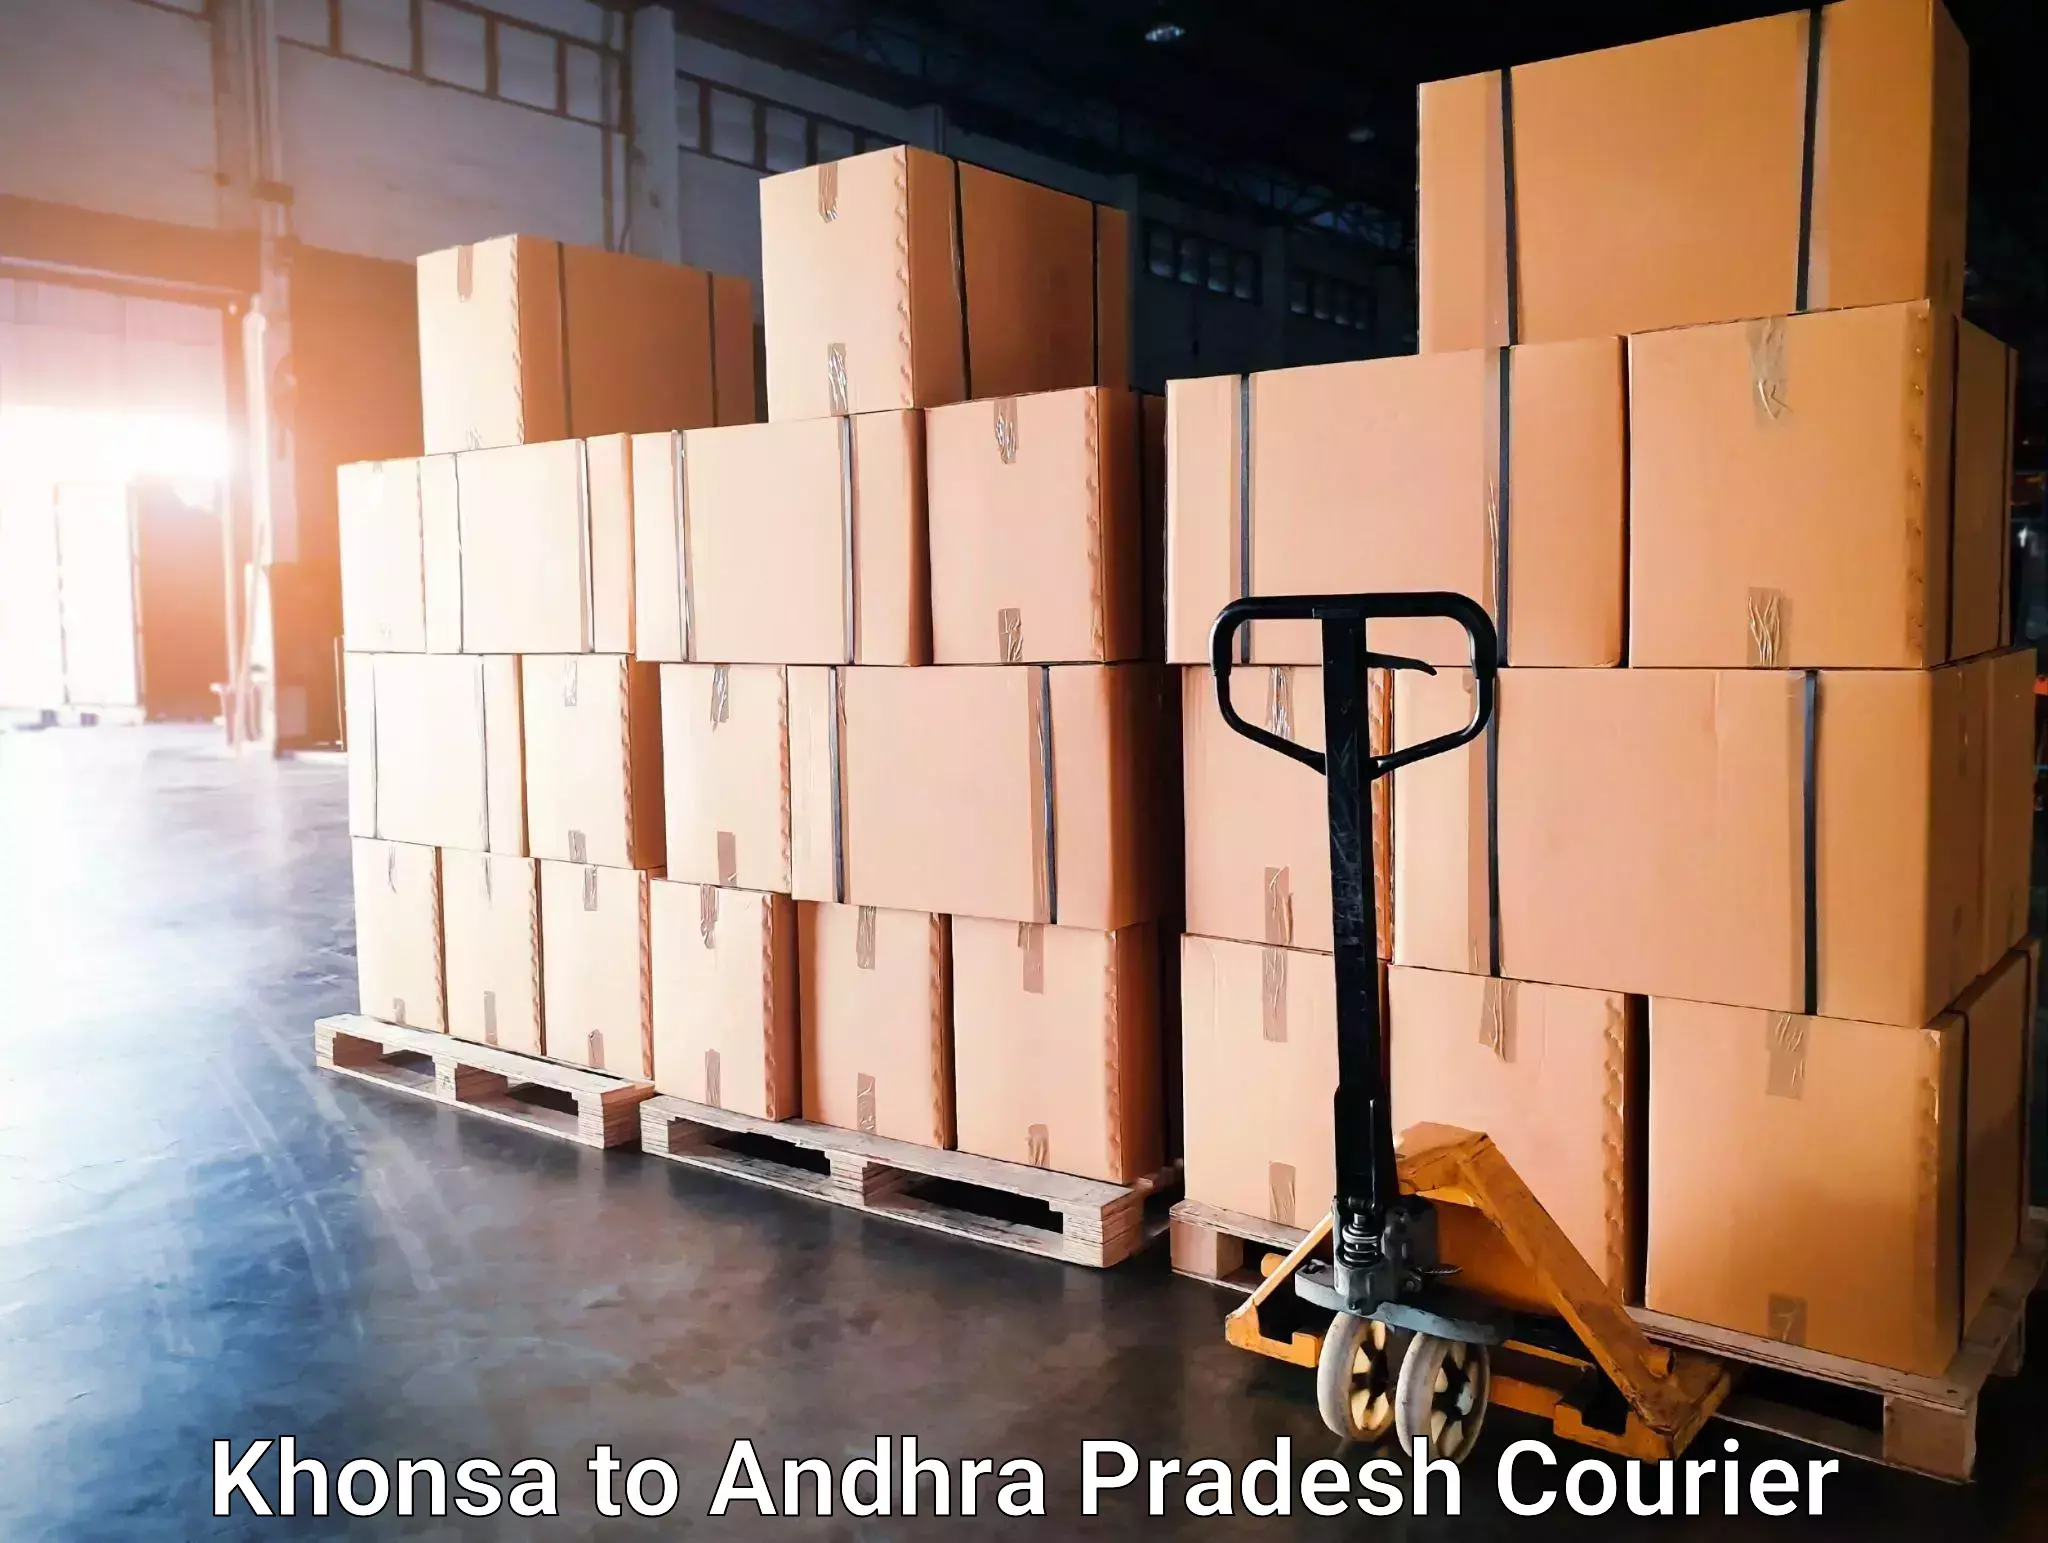 Next-day delivery options in Khonsa to Rajahmundry